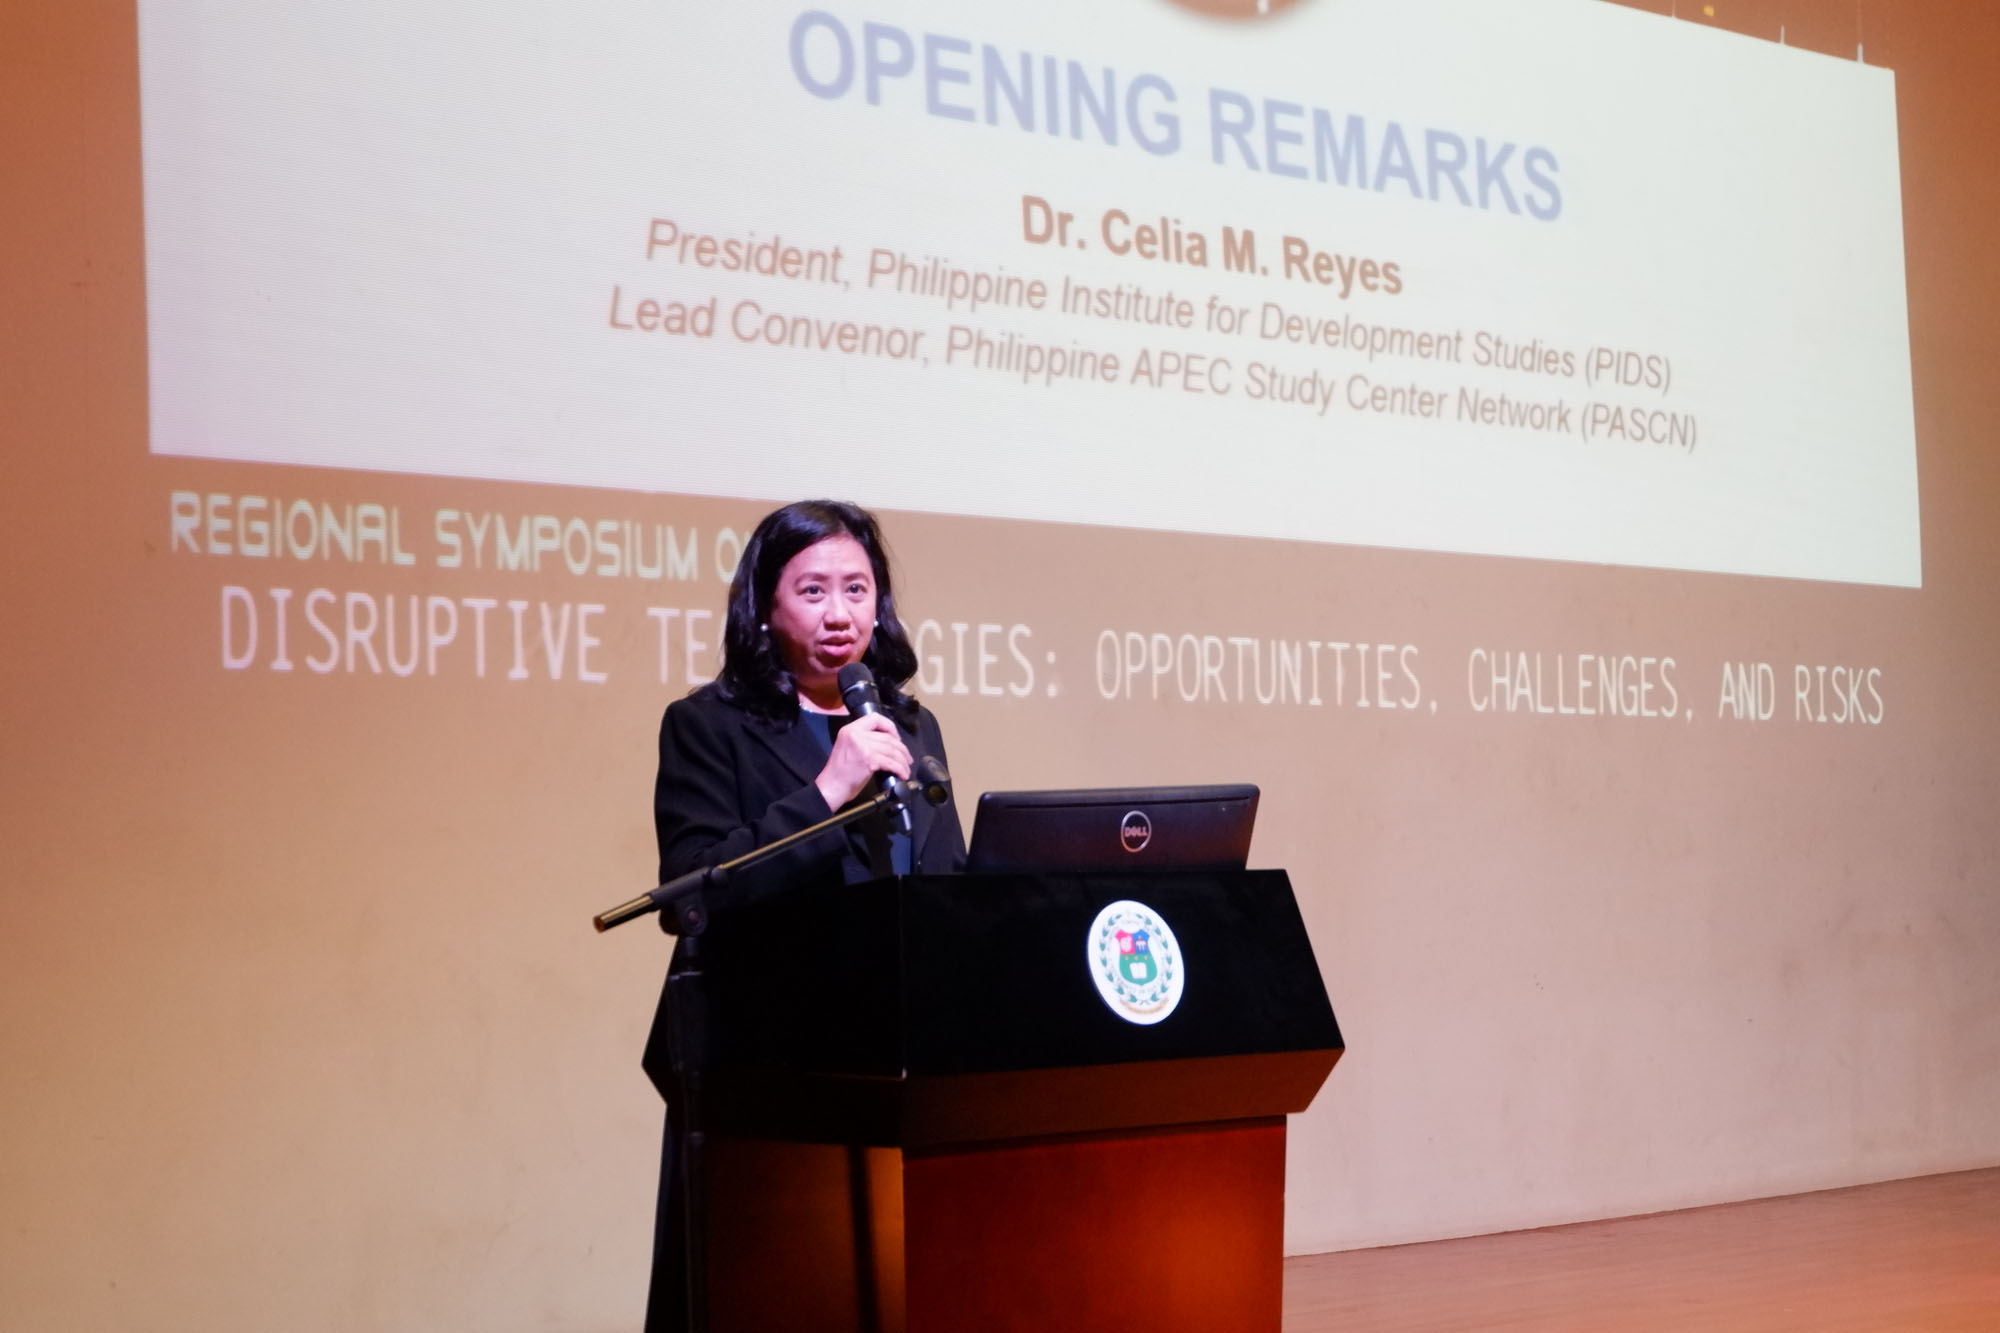 PASCN Regional Symposium on Disruptive Technologies: Opportunities, Challenges, and Risks-pascn-usc-13-20190123.jpg